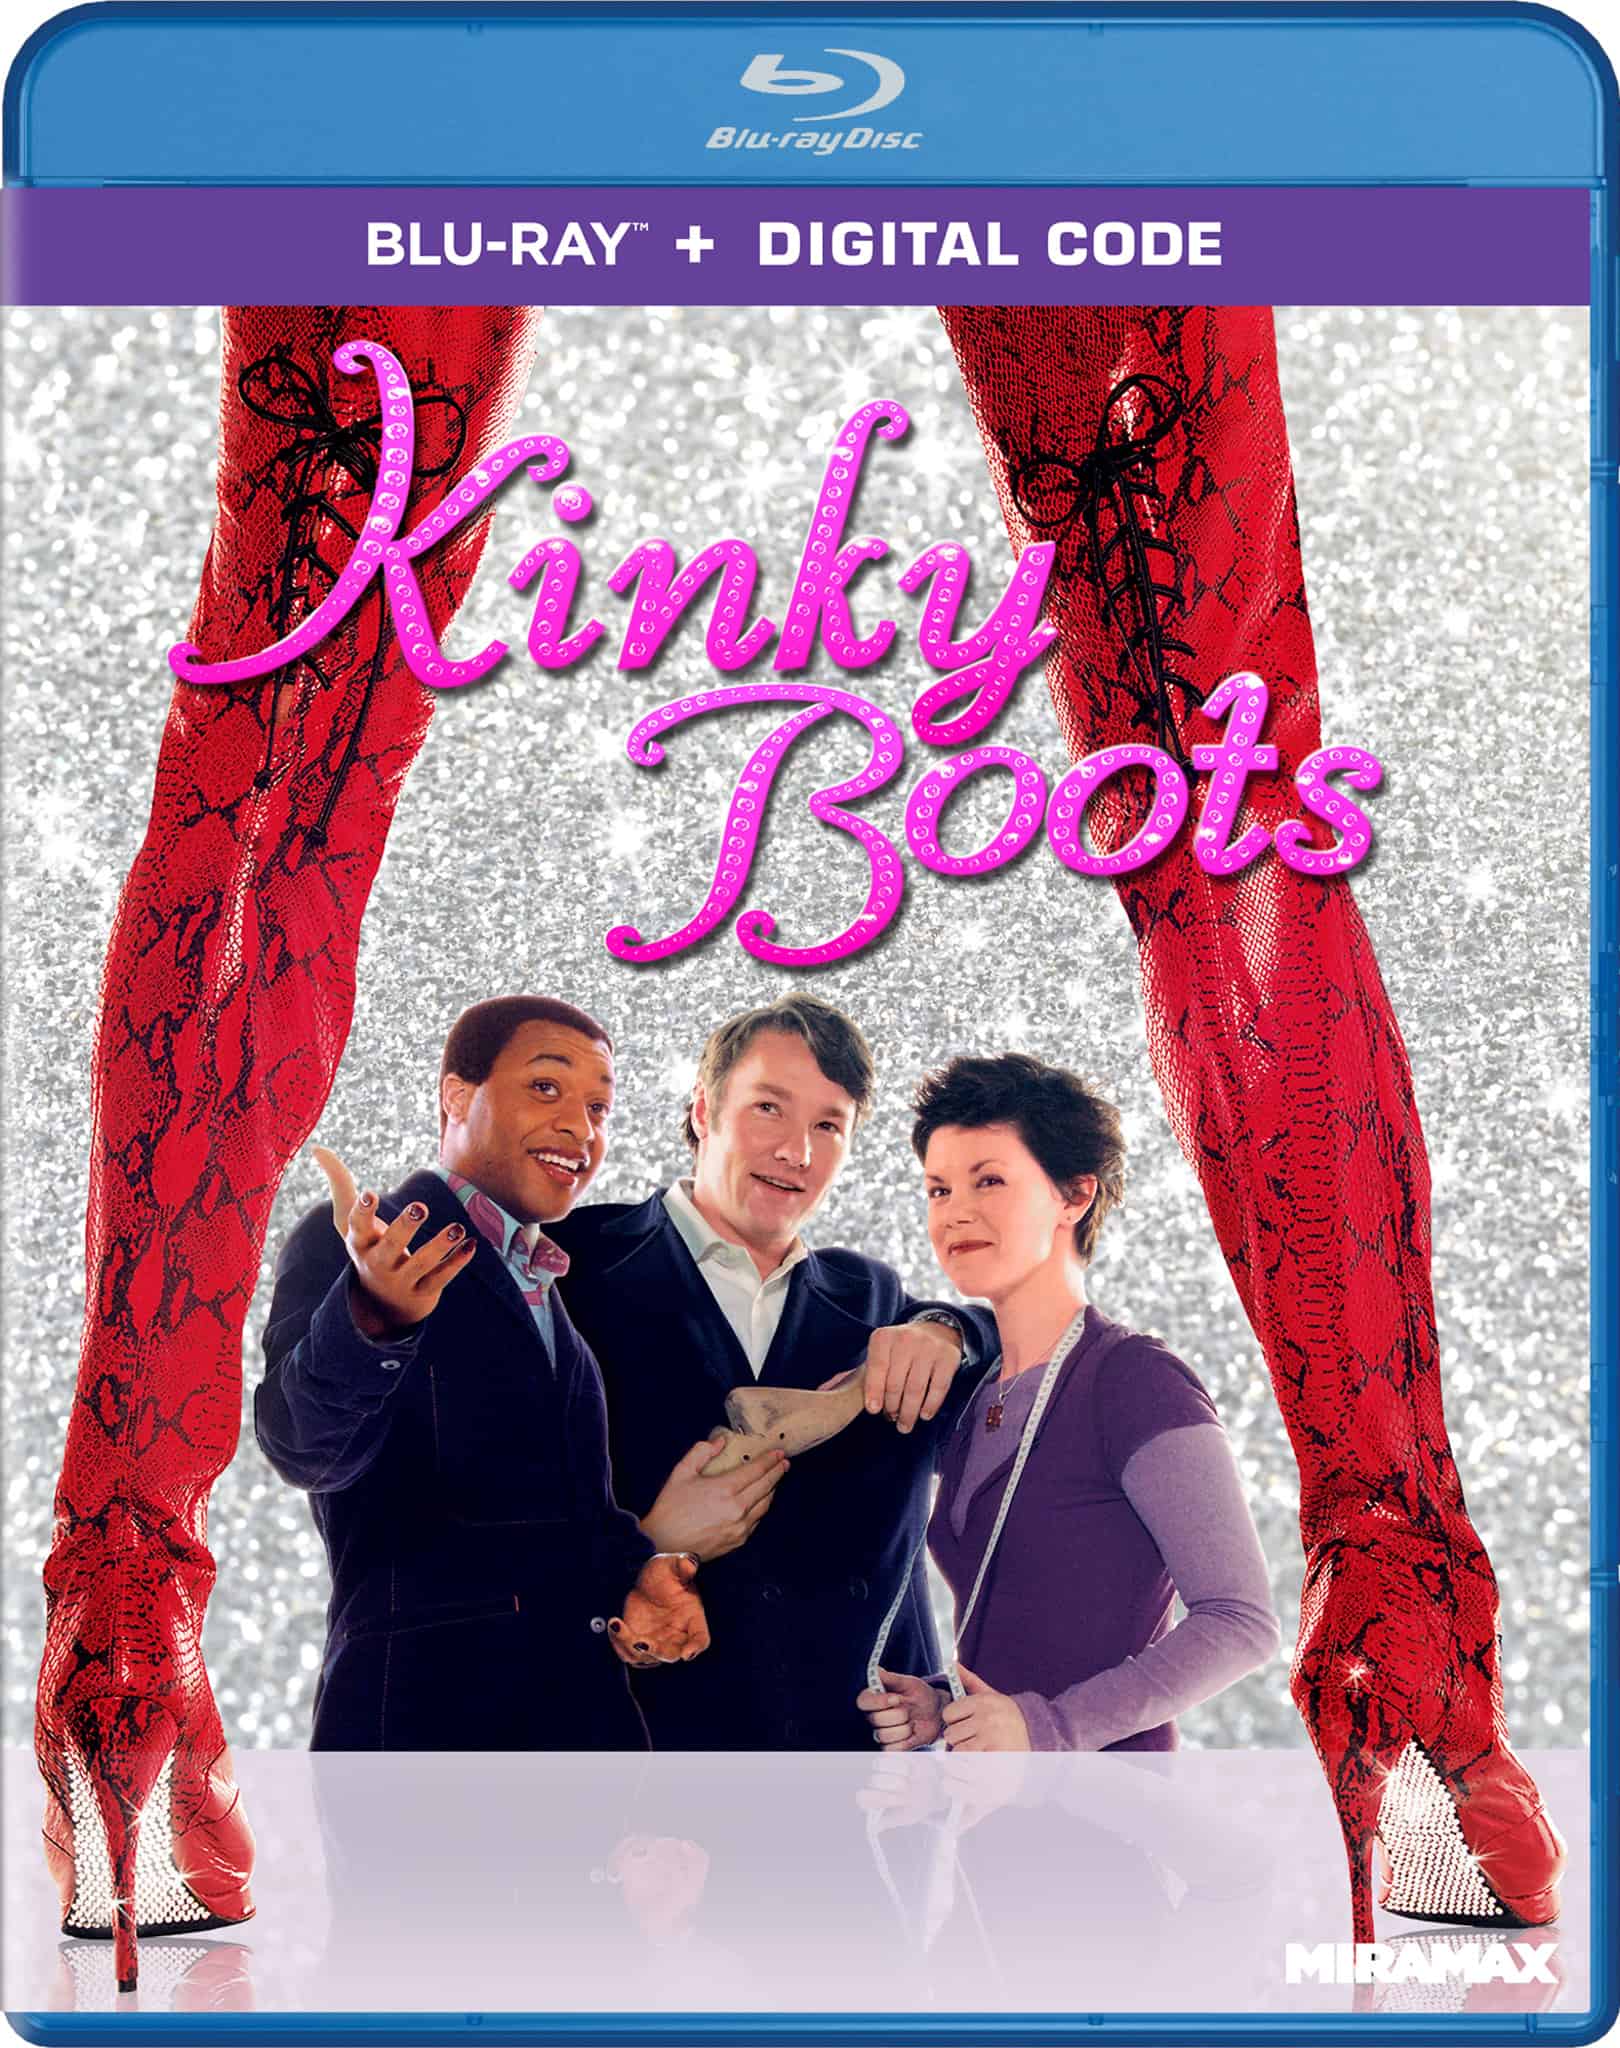 Kinky Boots wonderfully stomps Blu-ray on May 31st 2